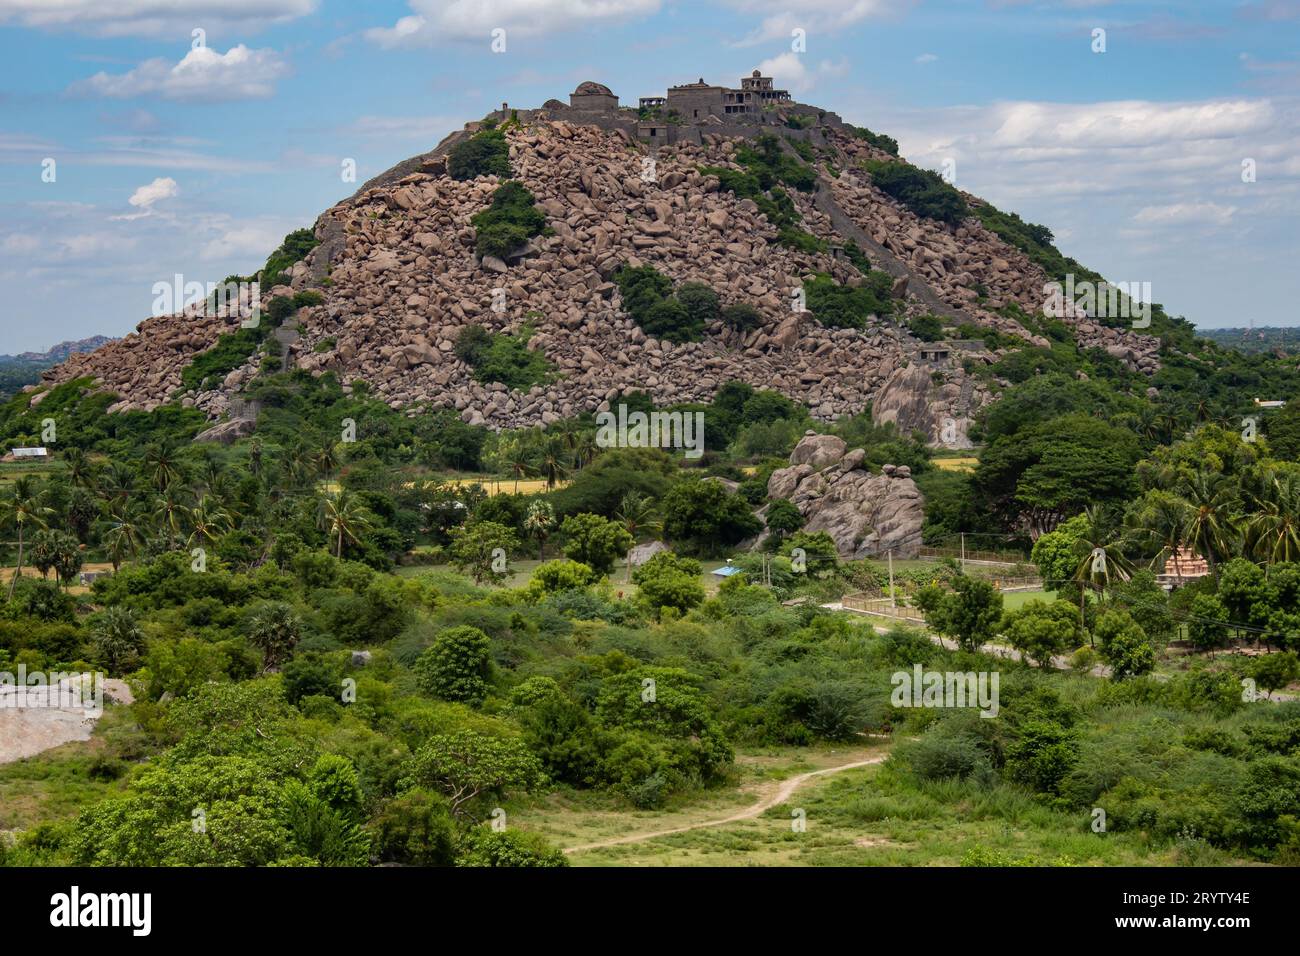 View of the Queen's fort in the Gingee Fort complex in Villupuram district, Tamil Nadu, India. Focus set on hill rocks. Stock Photo